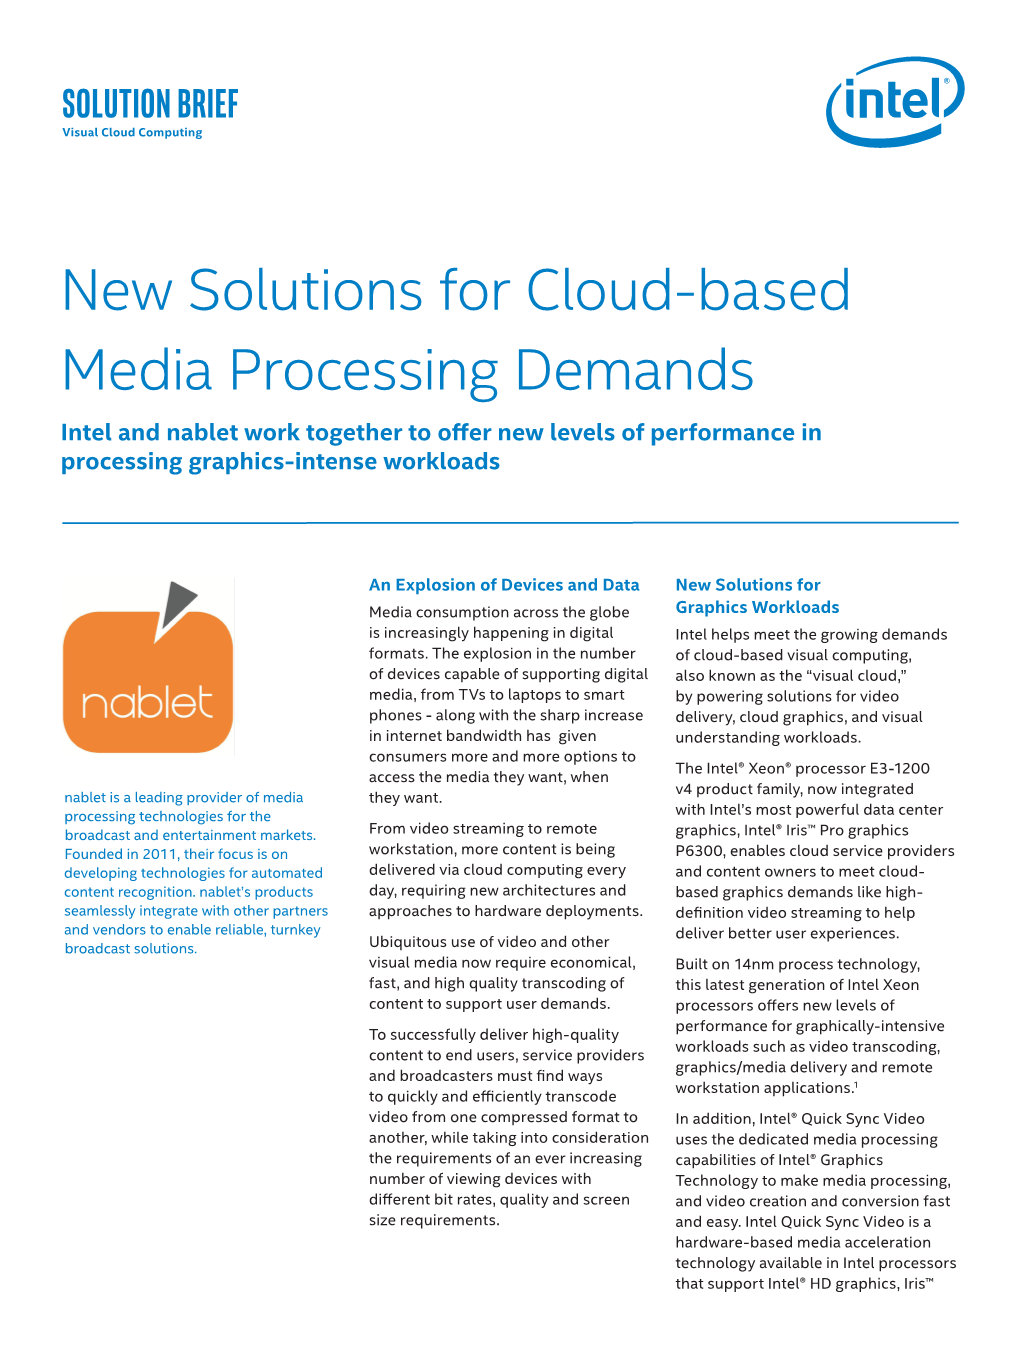 New Solutions for Cloud-Based Media Processing Demands Intel and Nablet Work Together to Offer New Levels of Performance in Processing Graphics-Intense Workloads